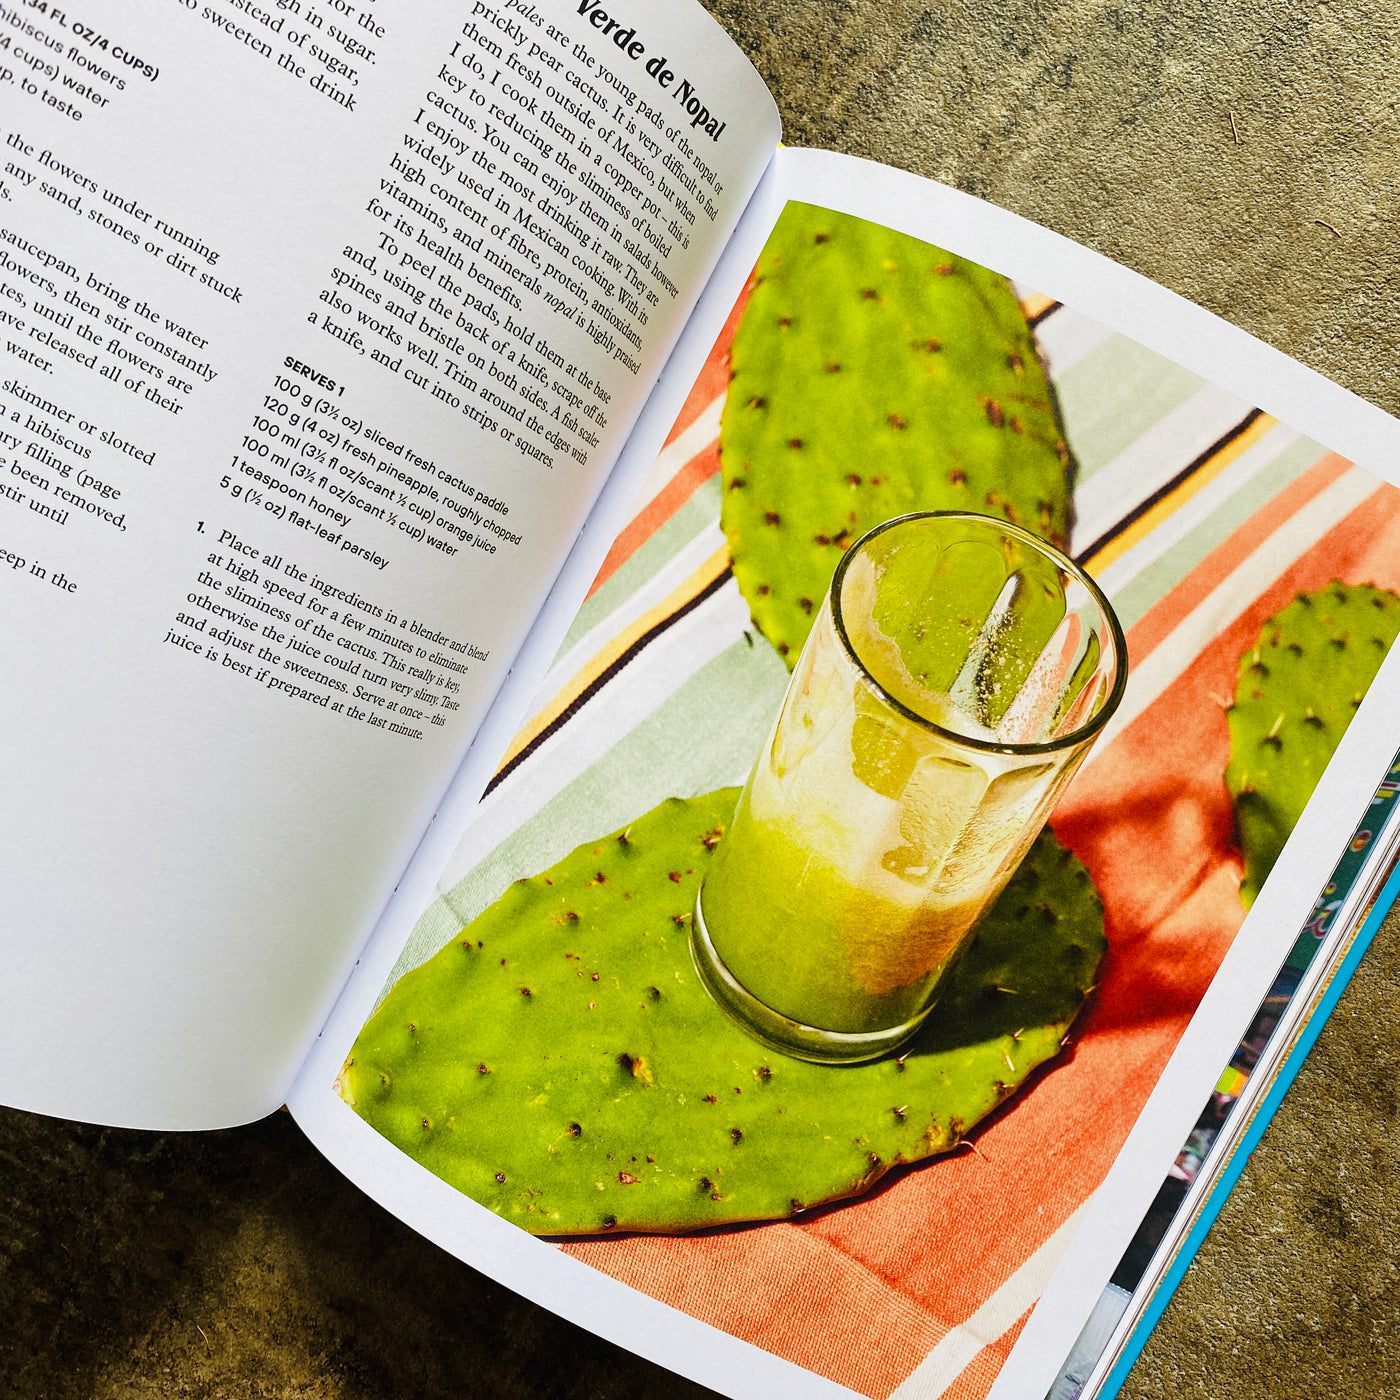 Top view of recipe inside Cuidad De Mexico cookbook. Right side features photo of nopales on a table with a clear glass of green juice. Left side is written out recipe in black and white format.